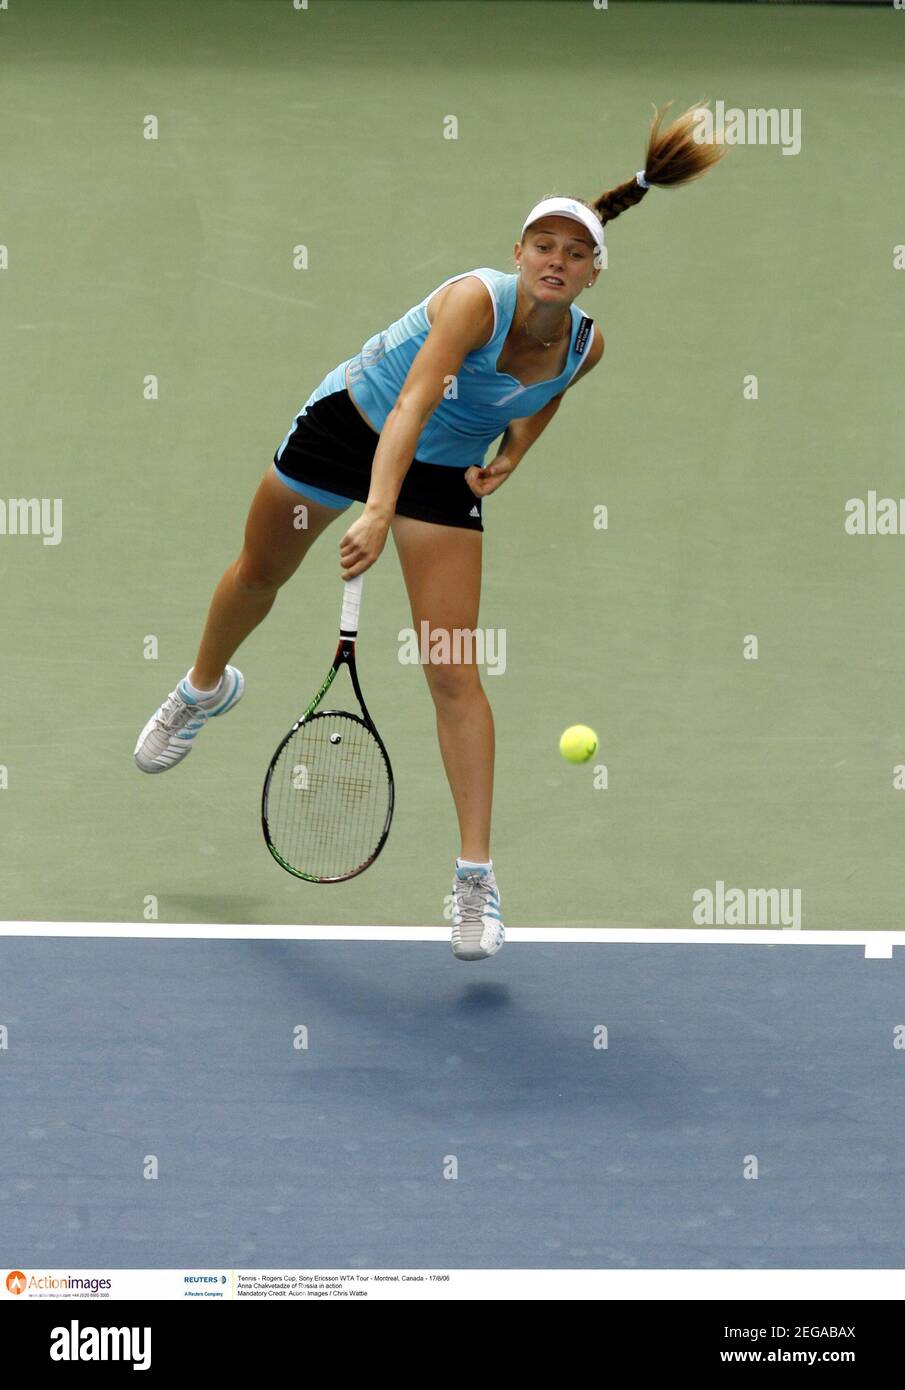 Tennis - Rogers Cup, Sony Ericsson WTA Tour - Montreal, Canada - 17/8/06  Anna Chakvetadze of Russia in action  Mandatory Credit: Action Images / Chris Wattie Stock Photo